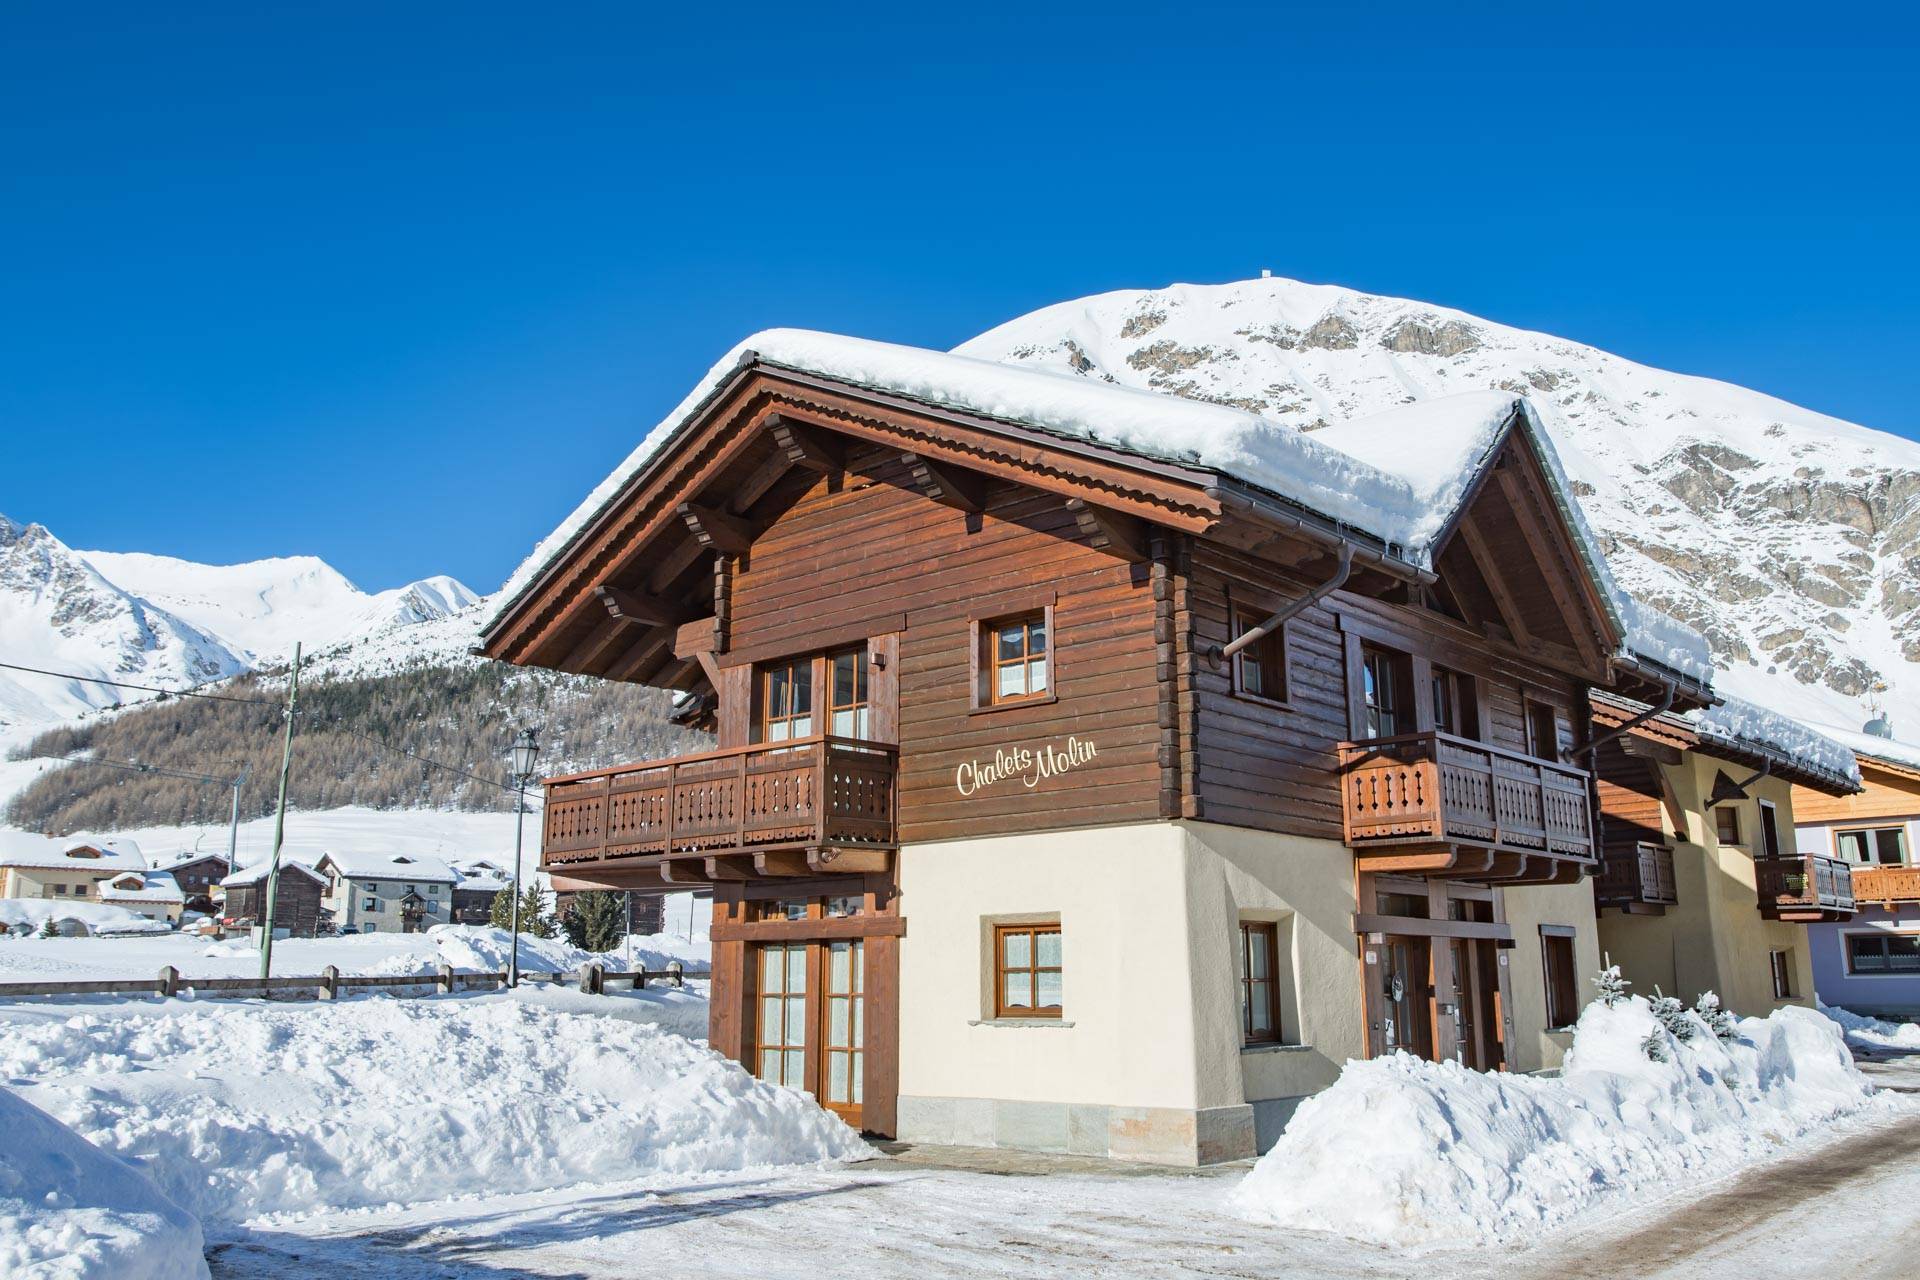 A relaxing holiday in Livigno, Valtellina